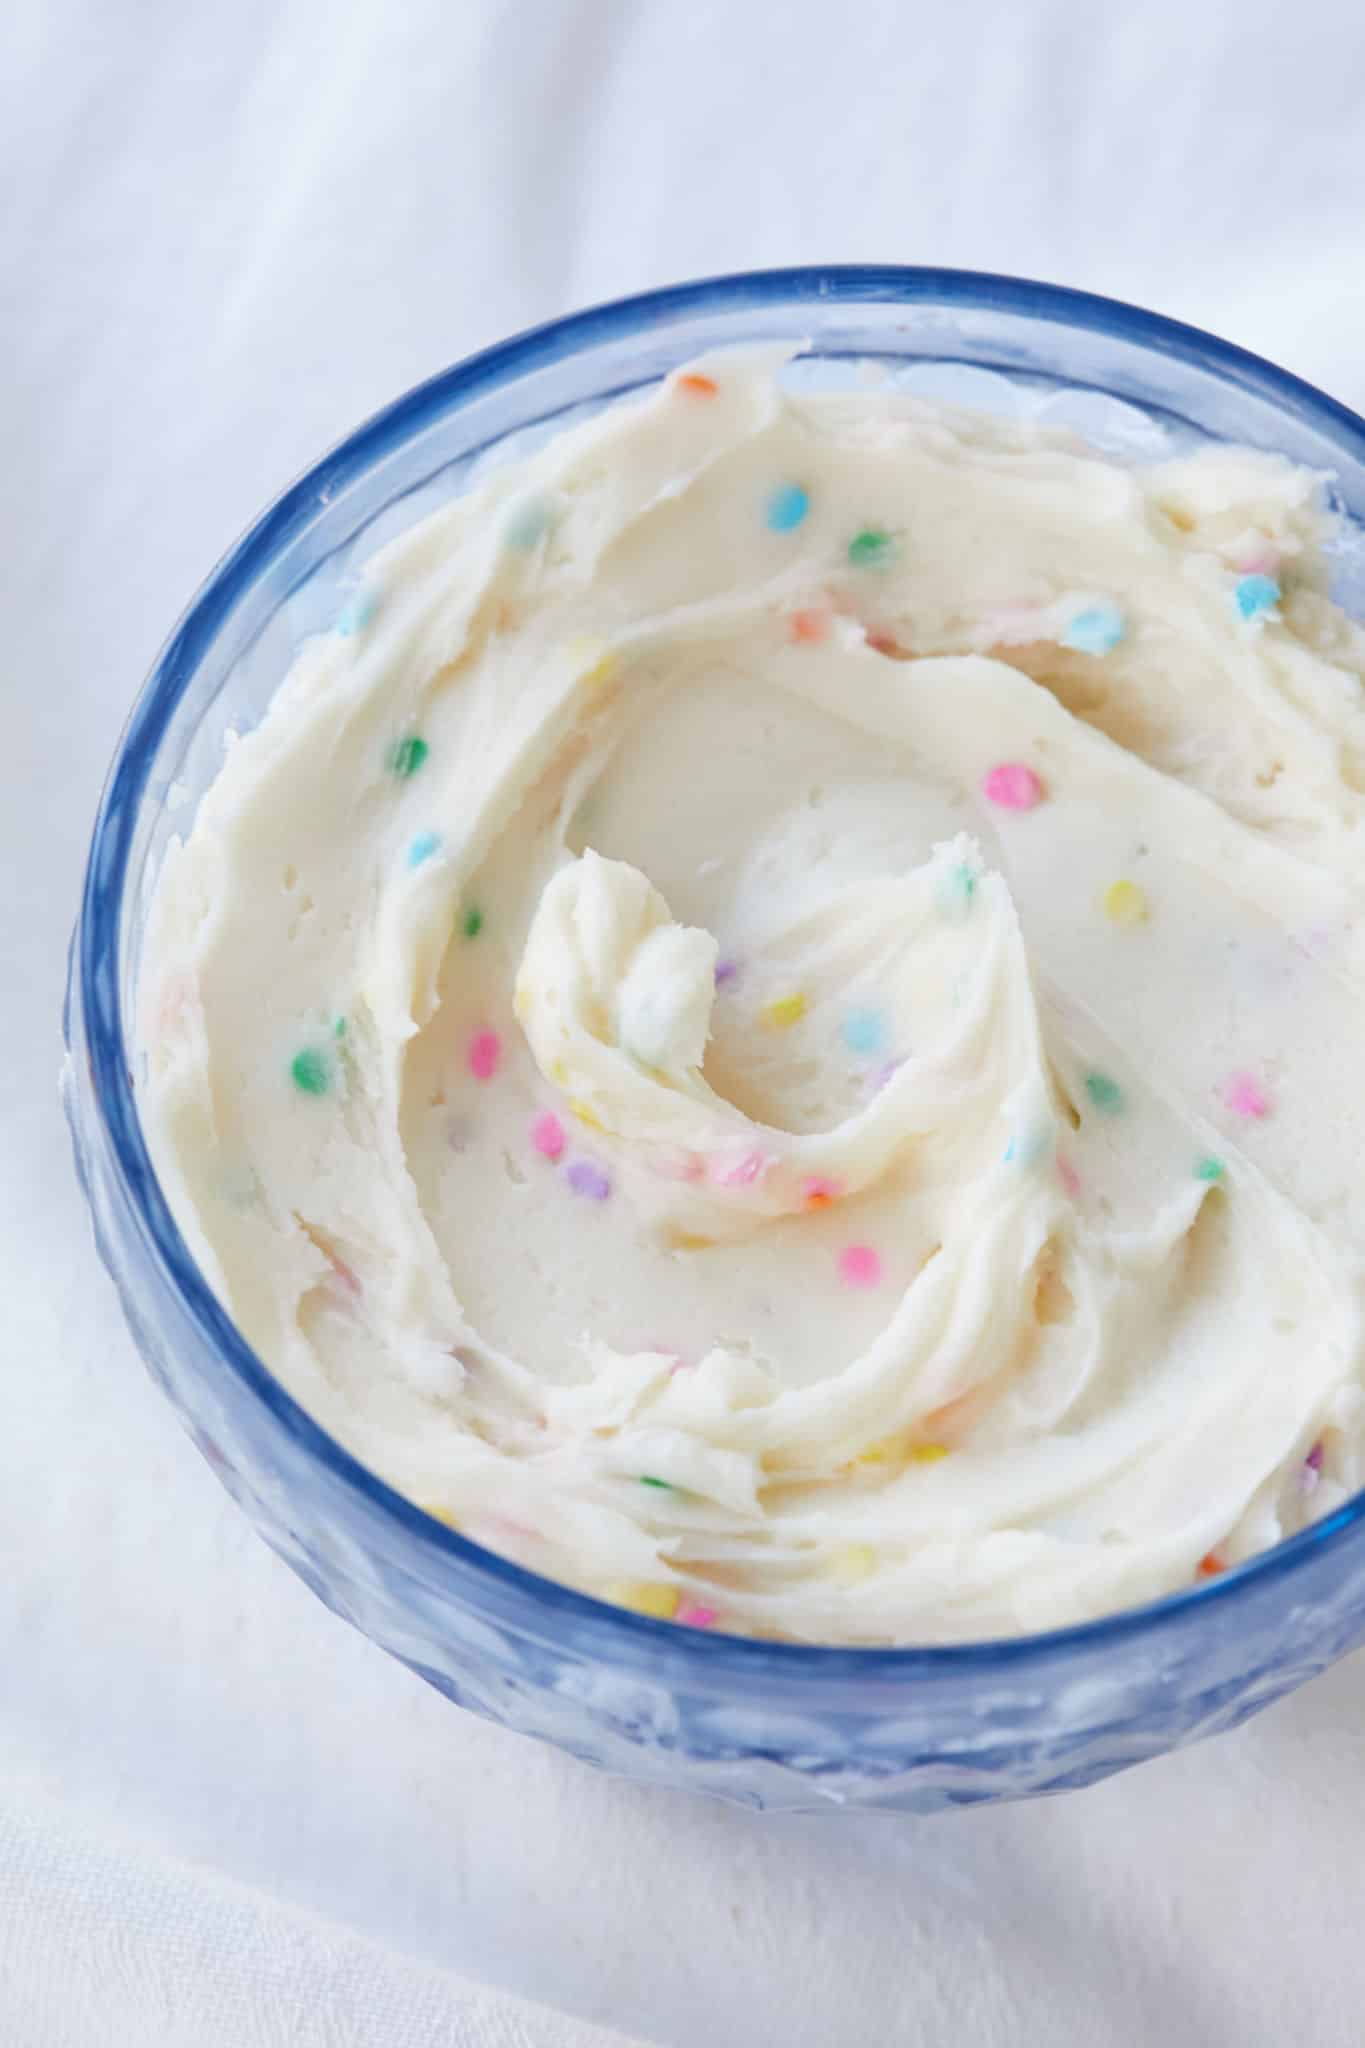 A top-down view of funfetti frosting in a blue bowl.